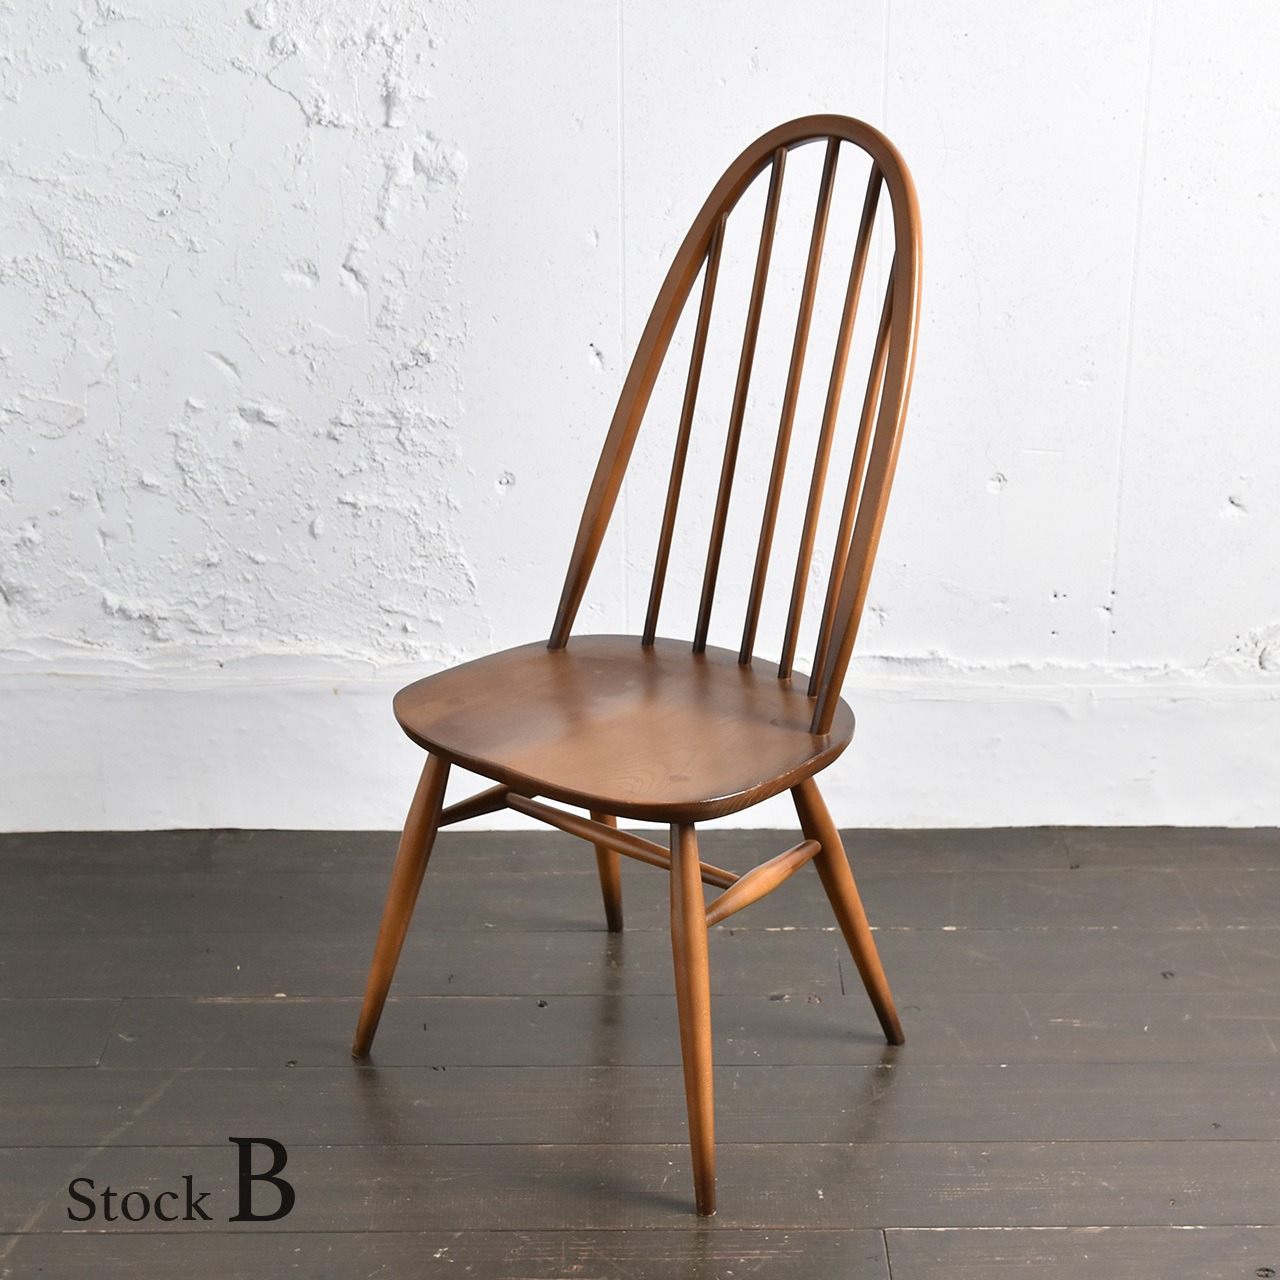 Ercol Quaker Chair (BR)【B】 / アーコール クエーカー チェア / 2206BNS-001B